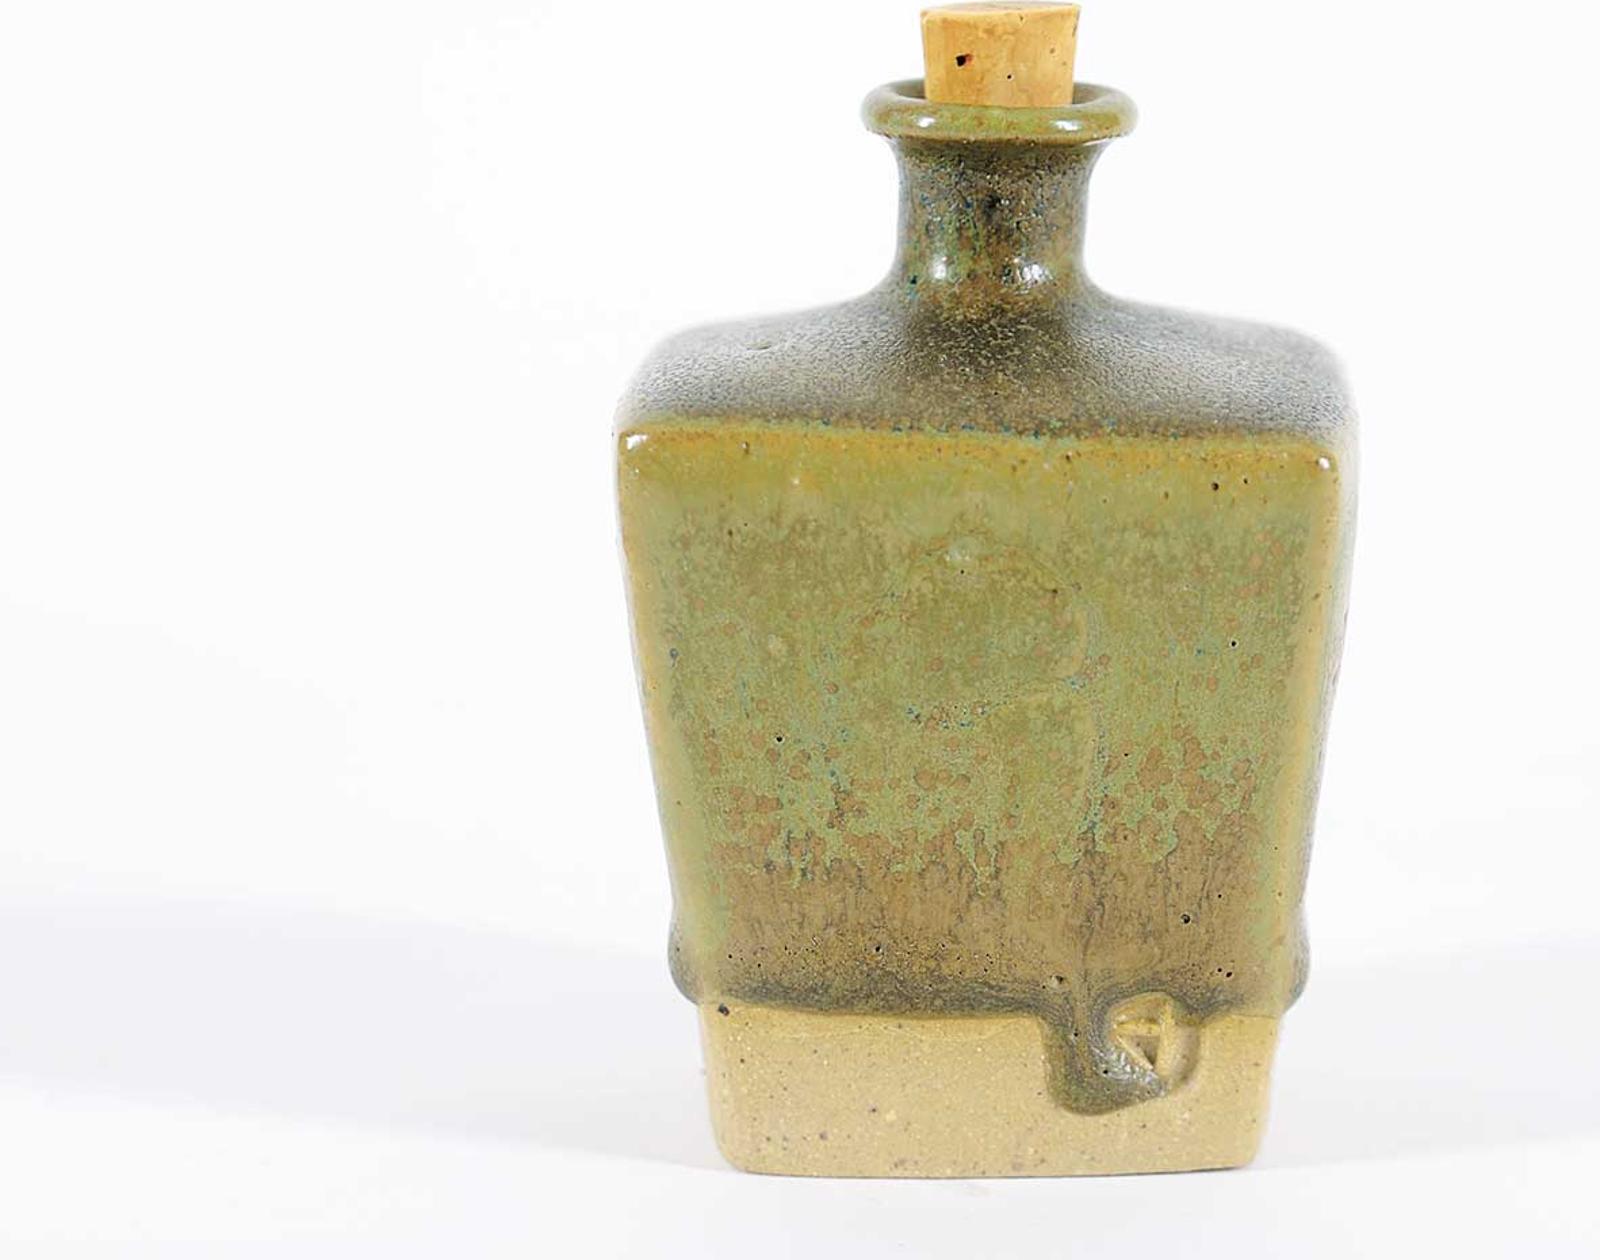 Kathleen Hamilton - Untitled - Green Flask with Cork Stopper